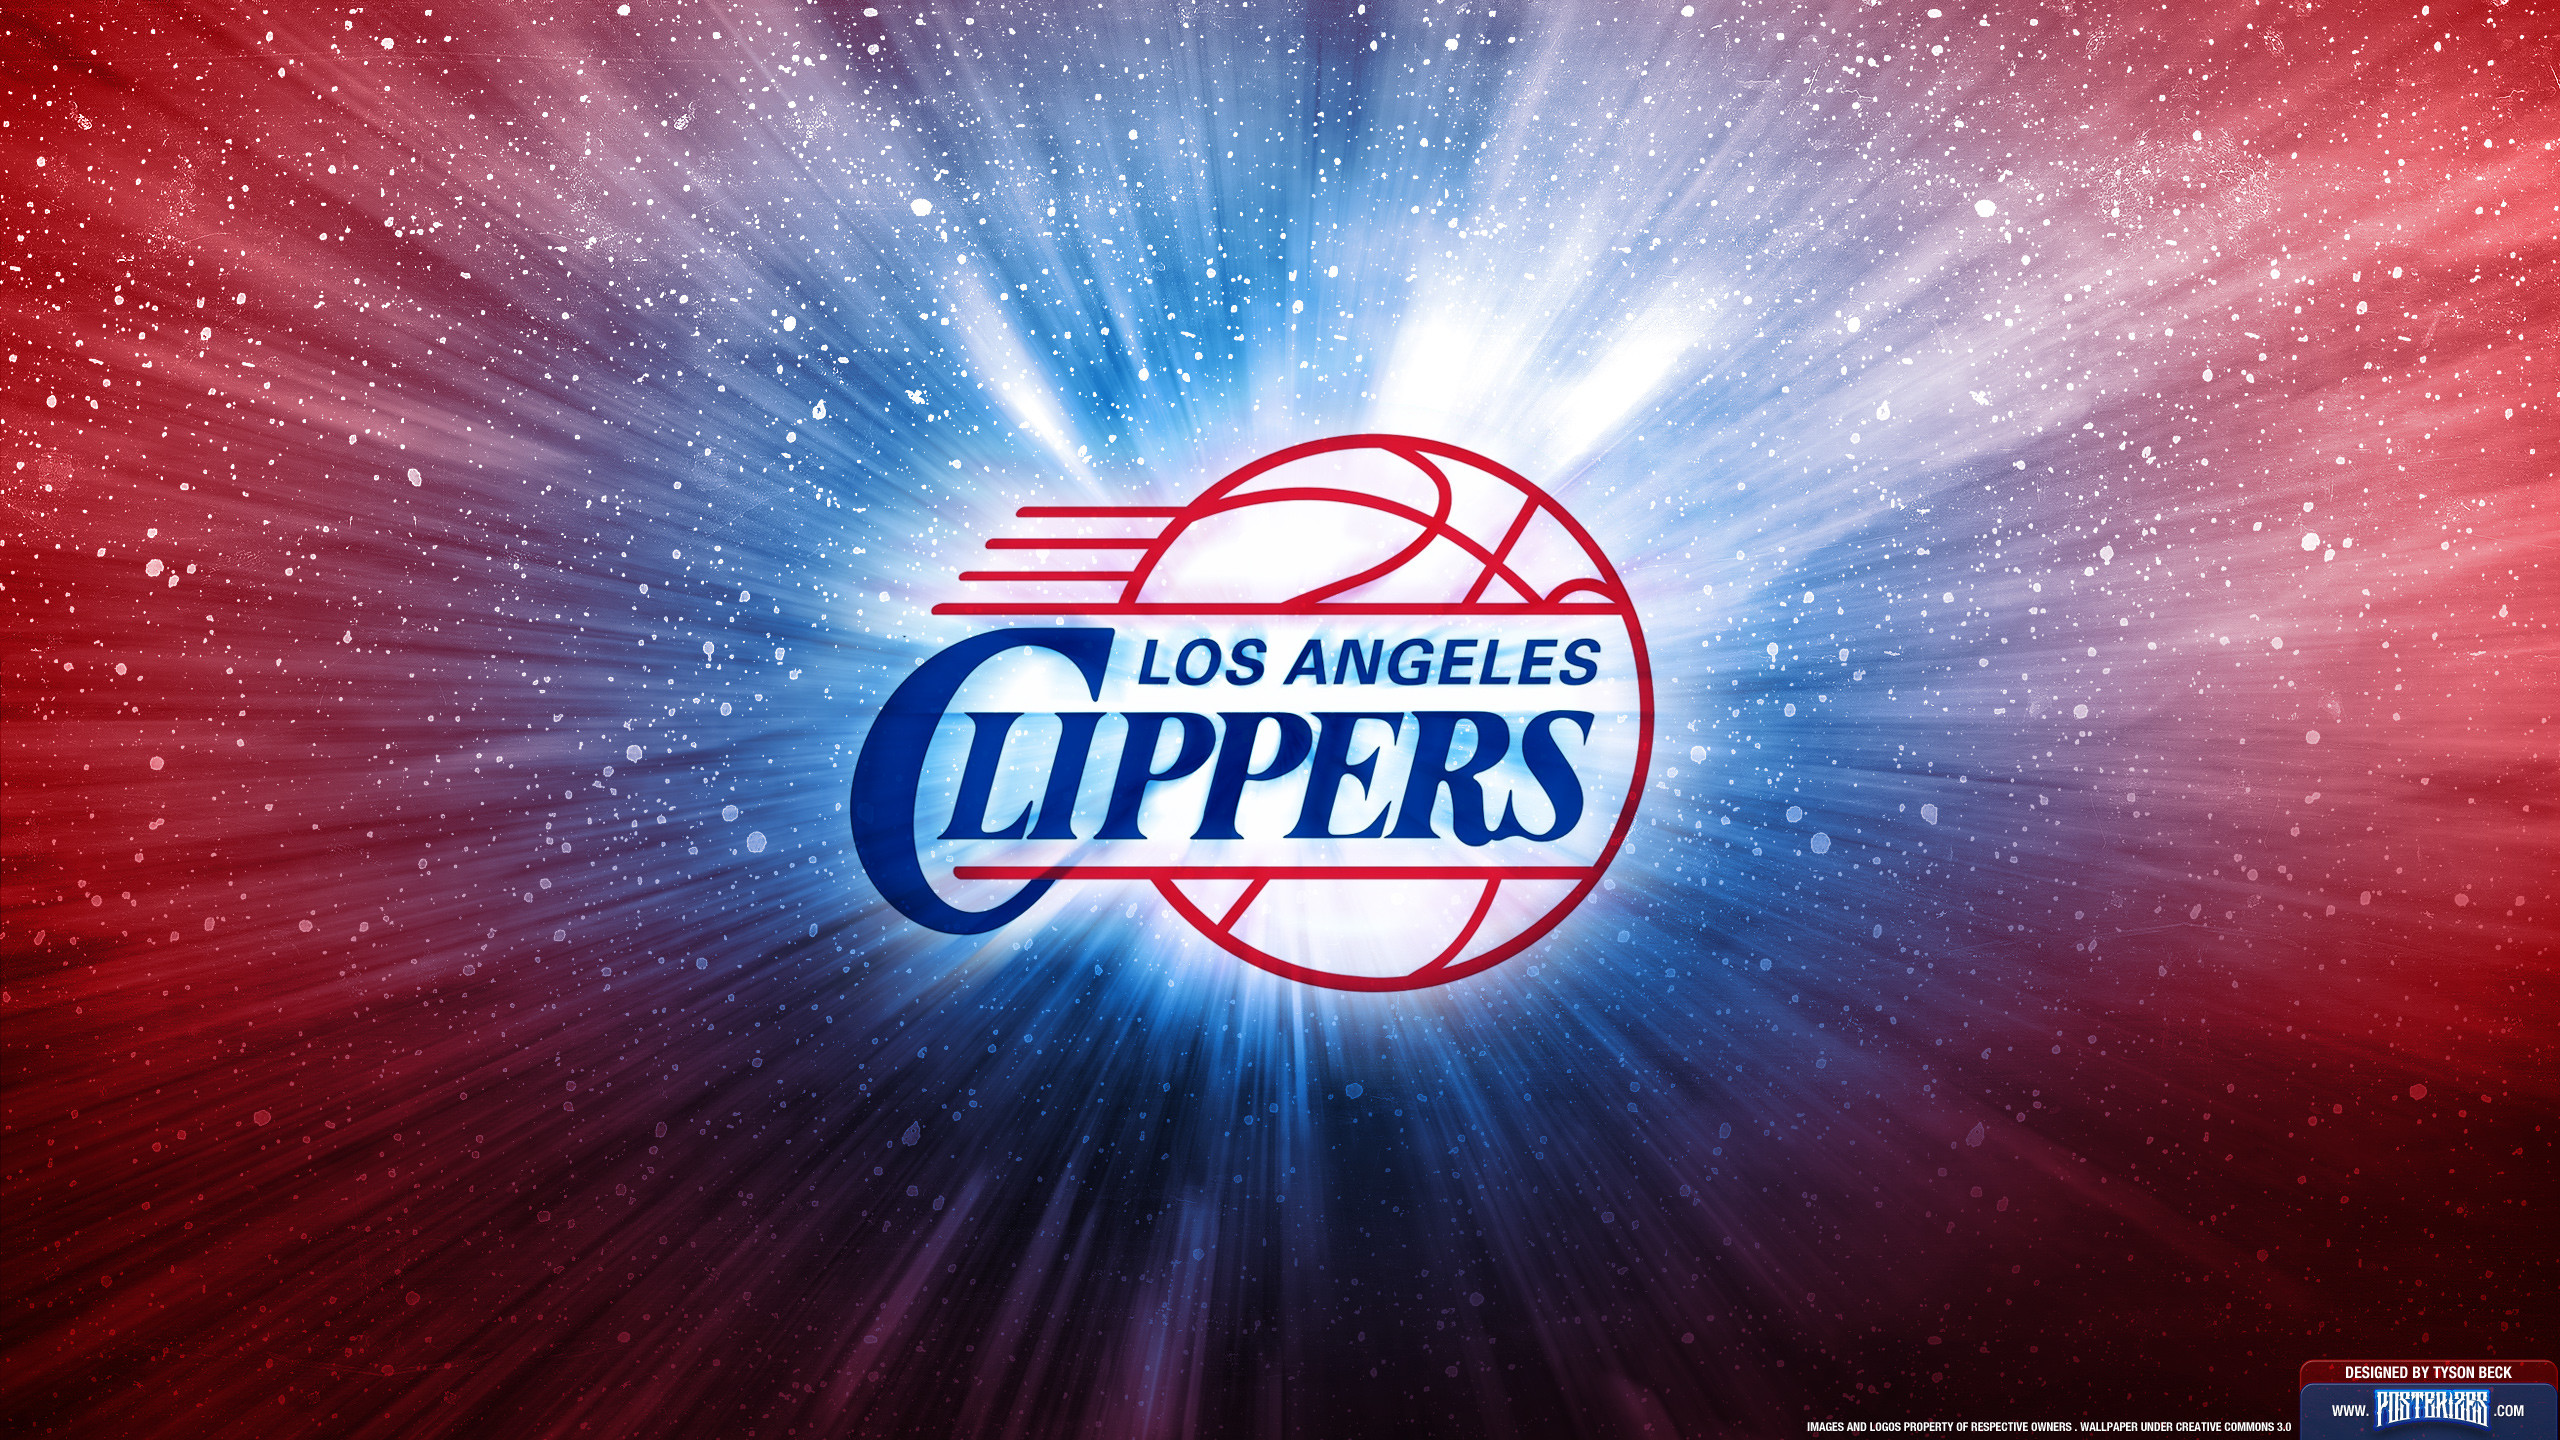 Los Angeles Clippers Wallpapers Adorable Hdq Backgrounds Of Los Angeles Clippers 2560x1440 2560x1440